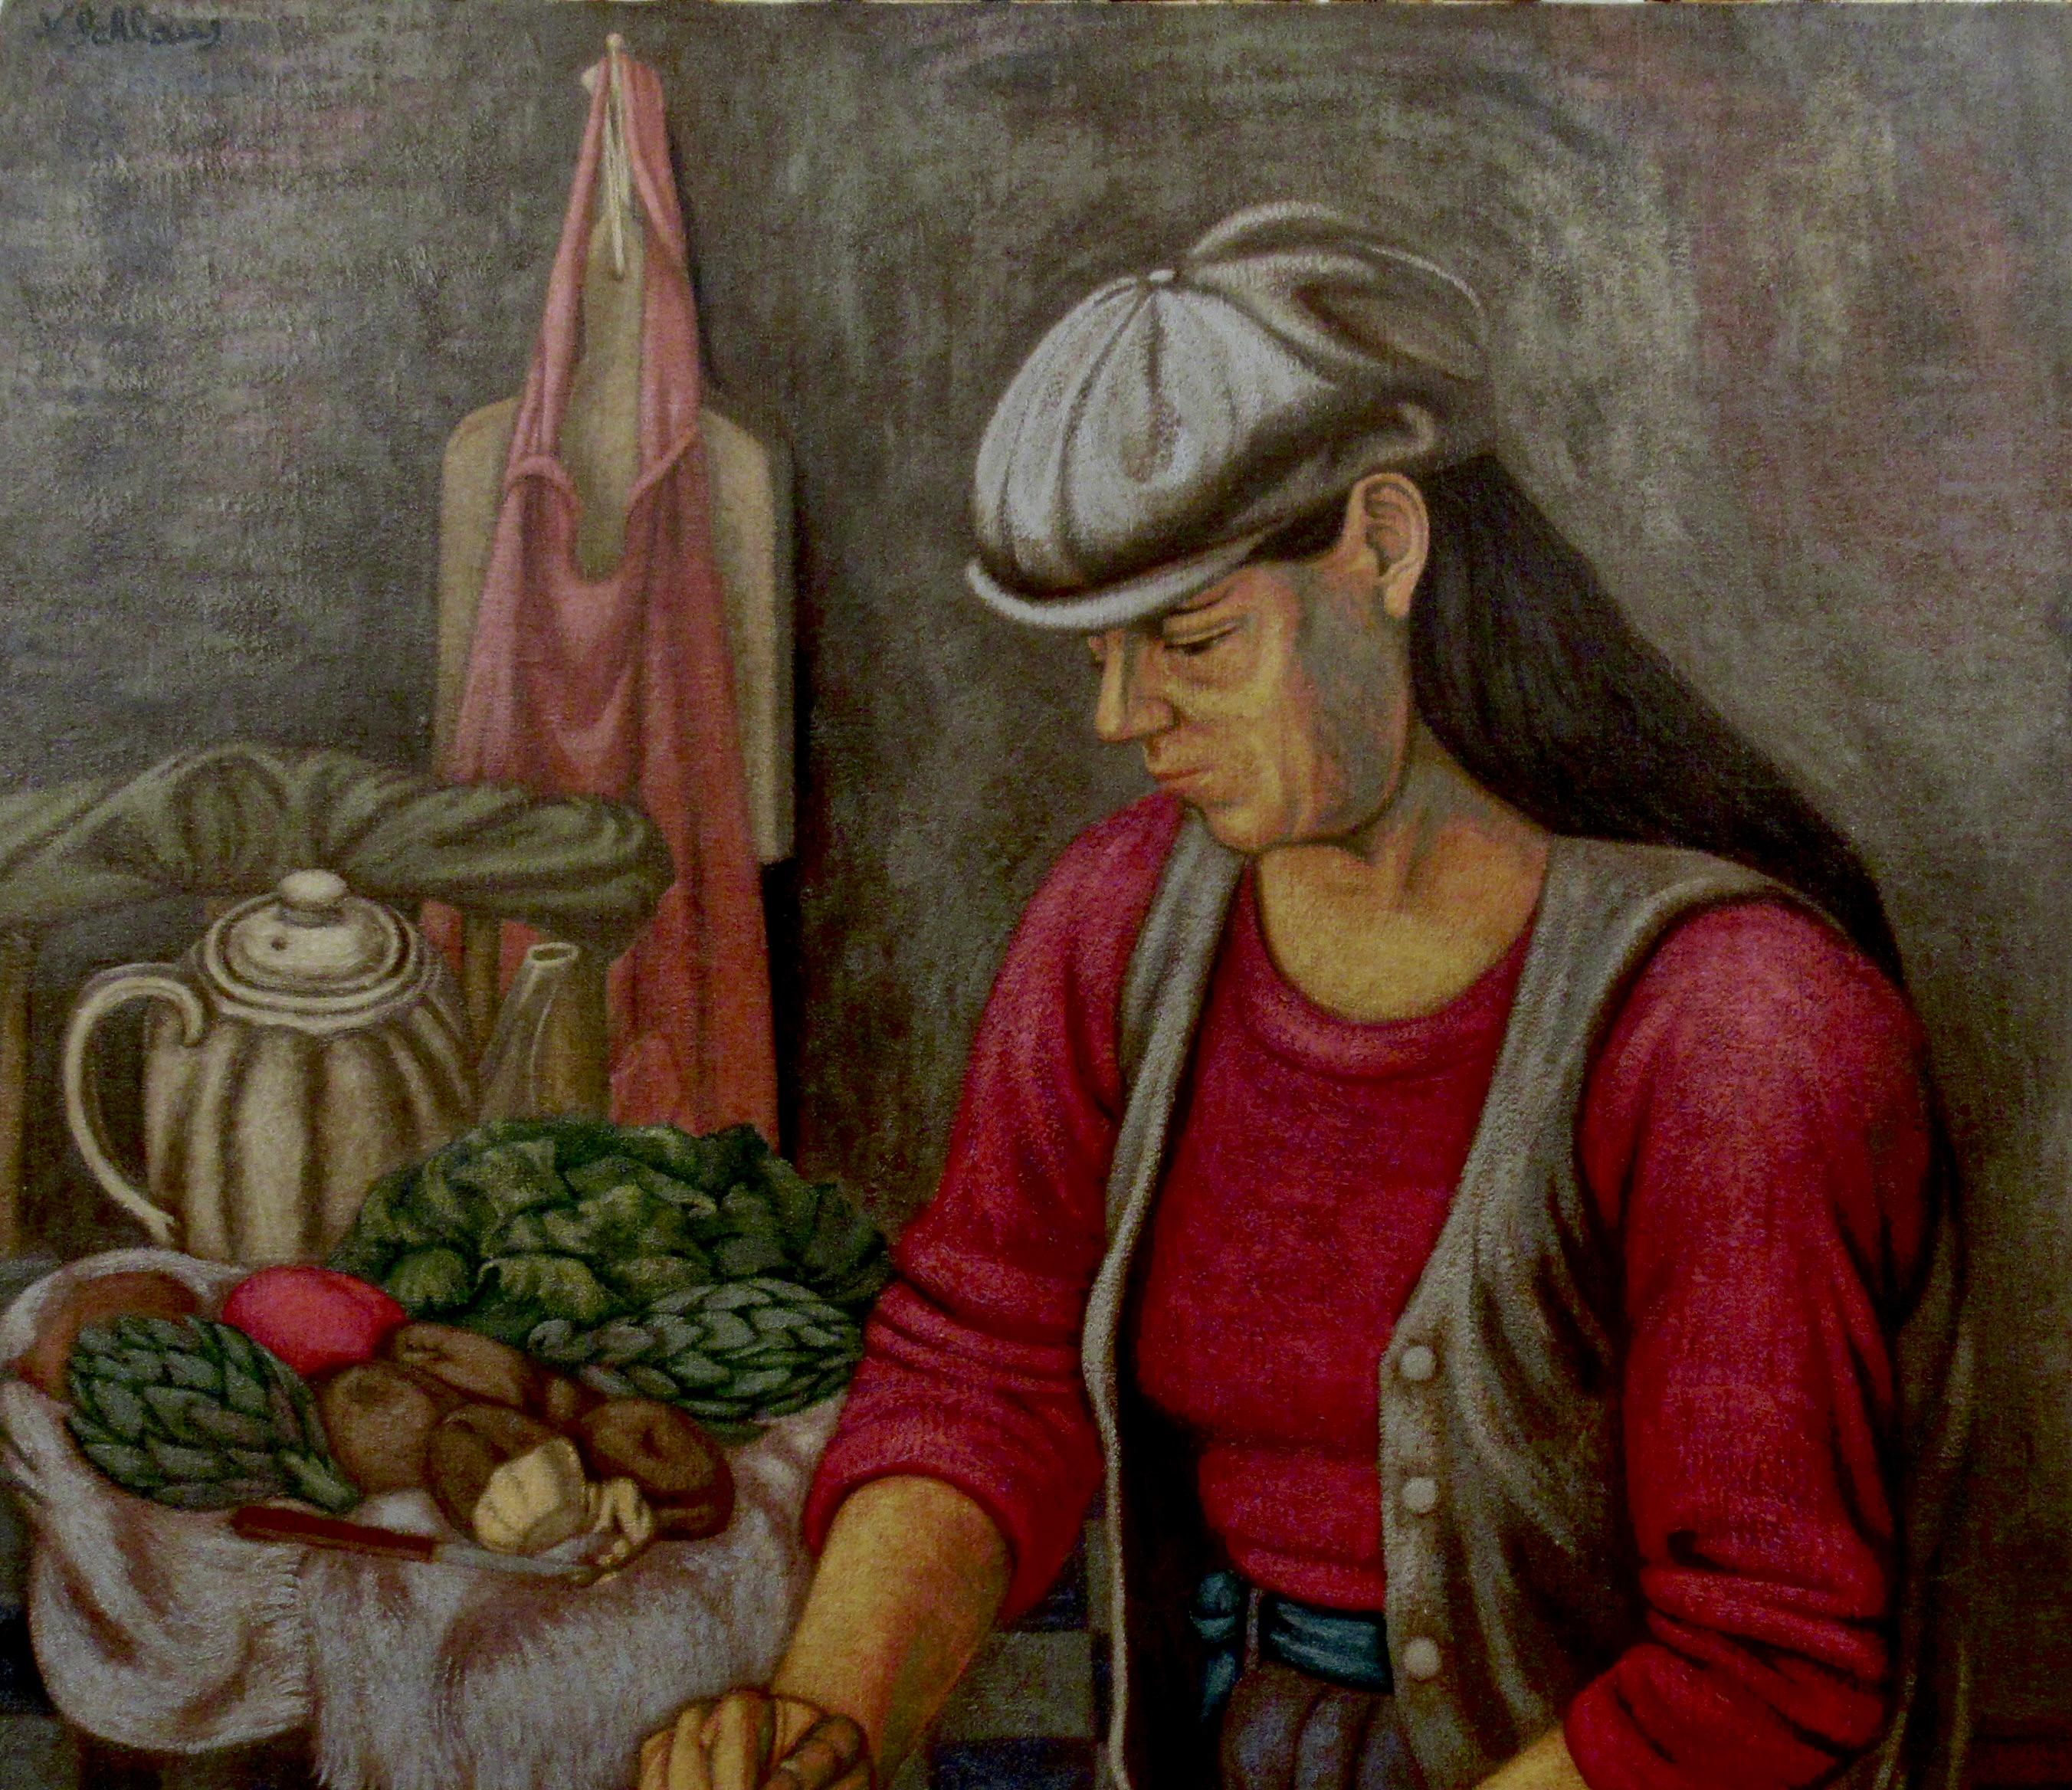 Grinding Coffee - Painting by Norbert Schlaus